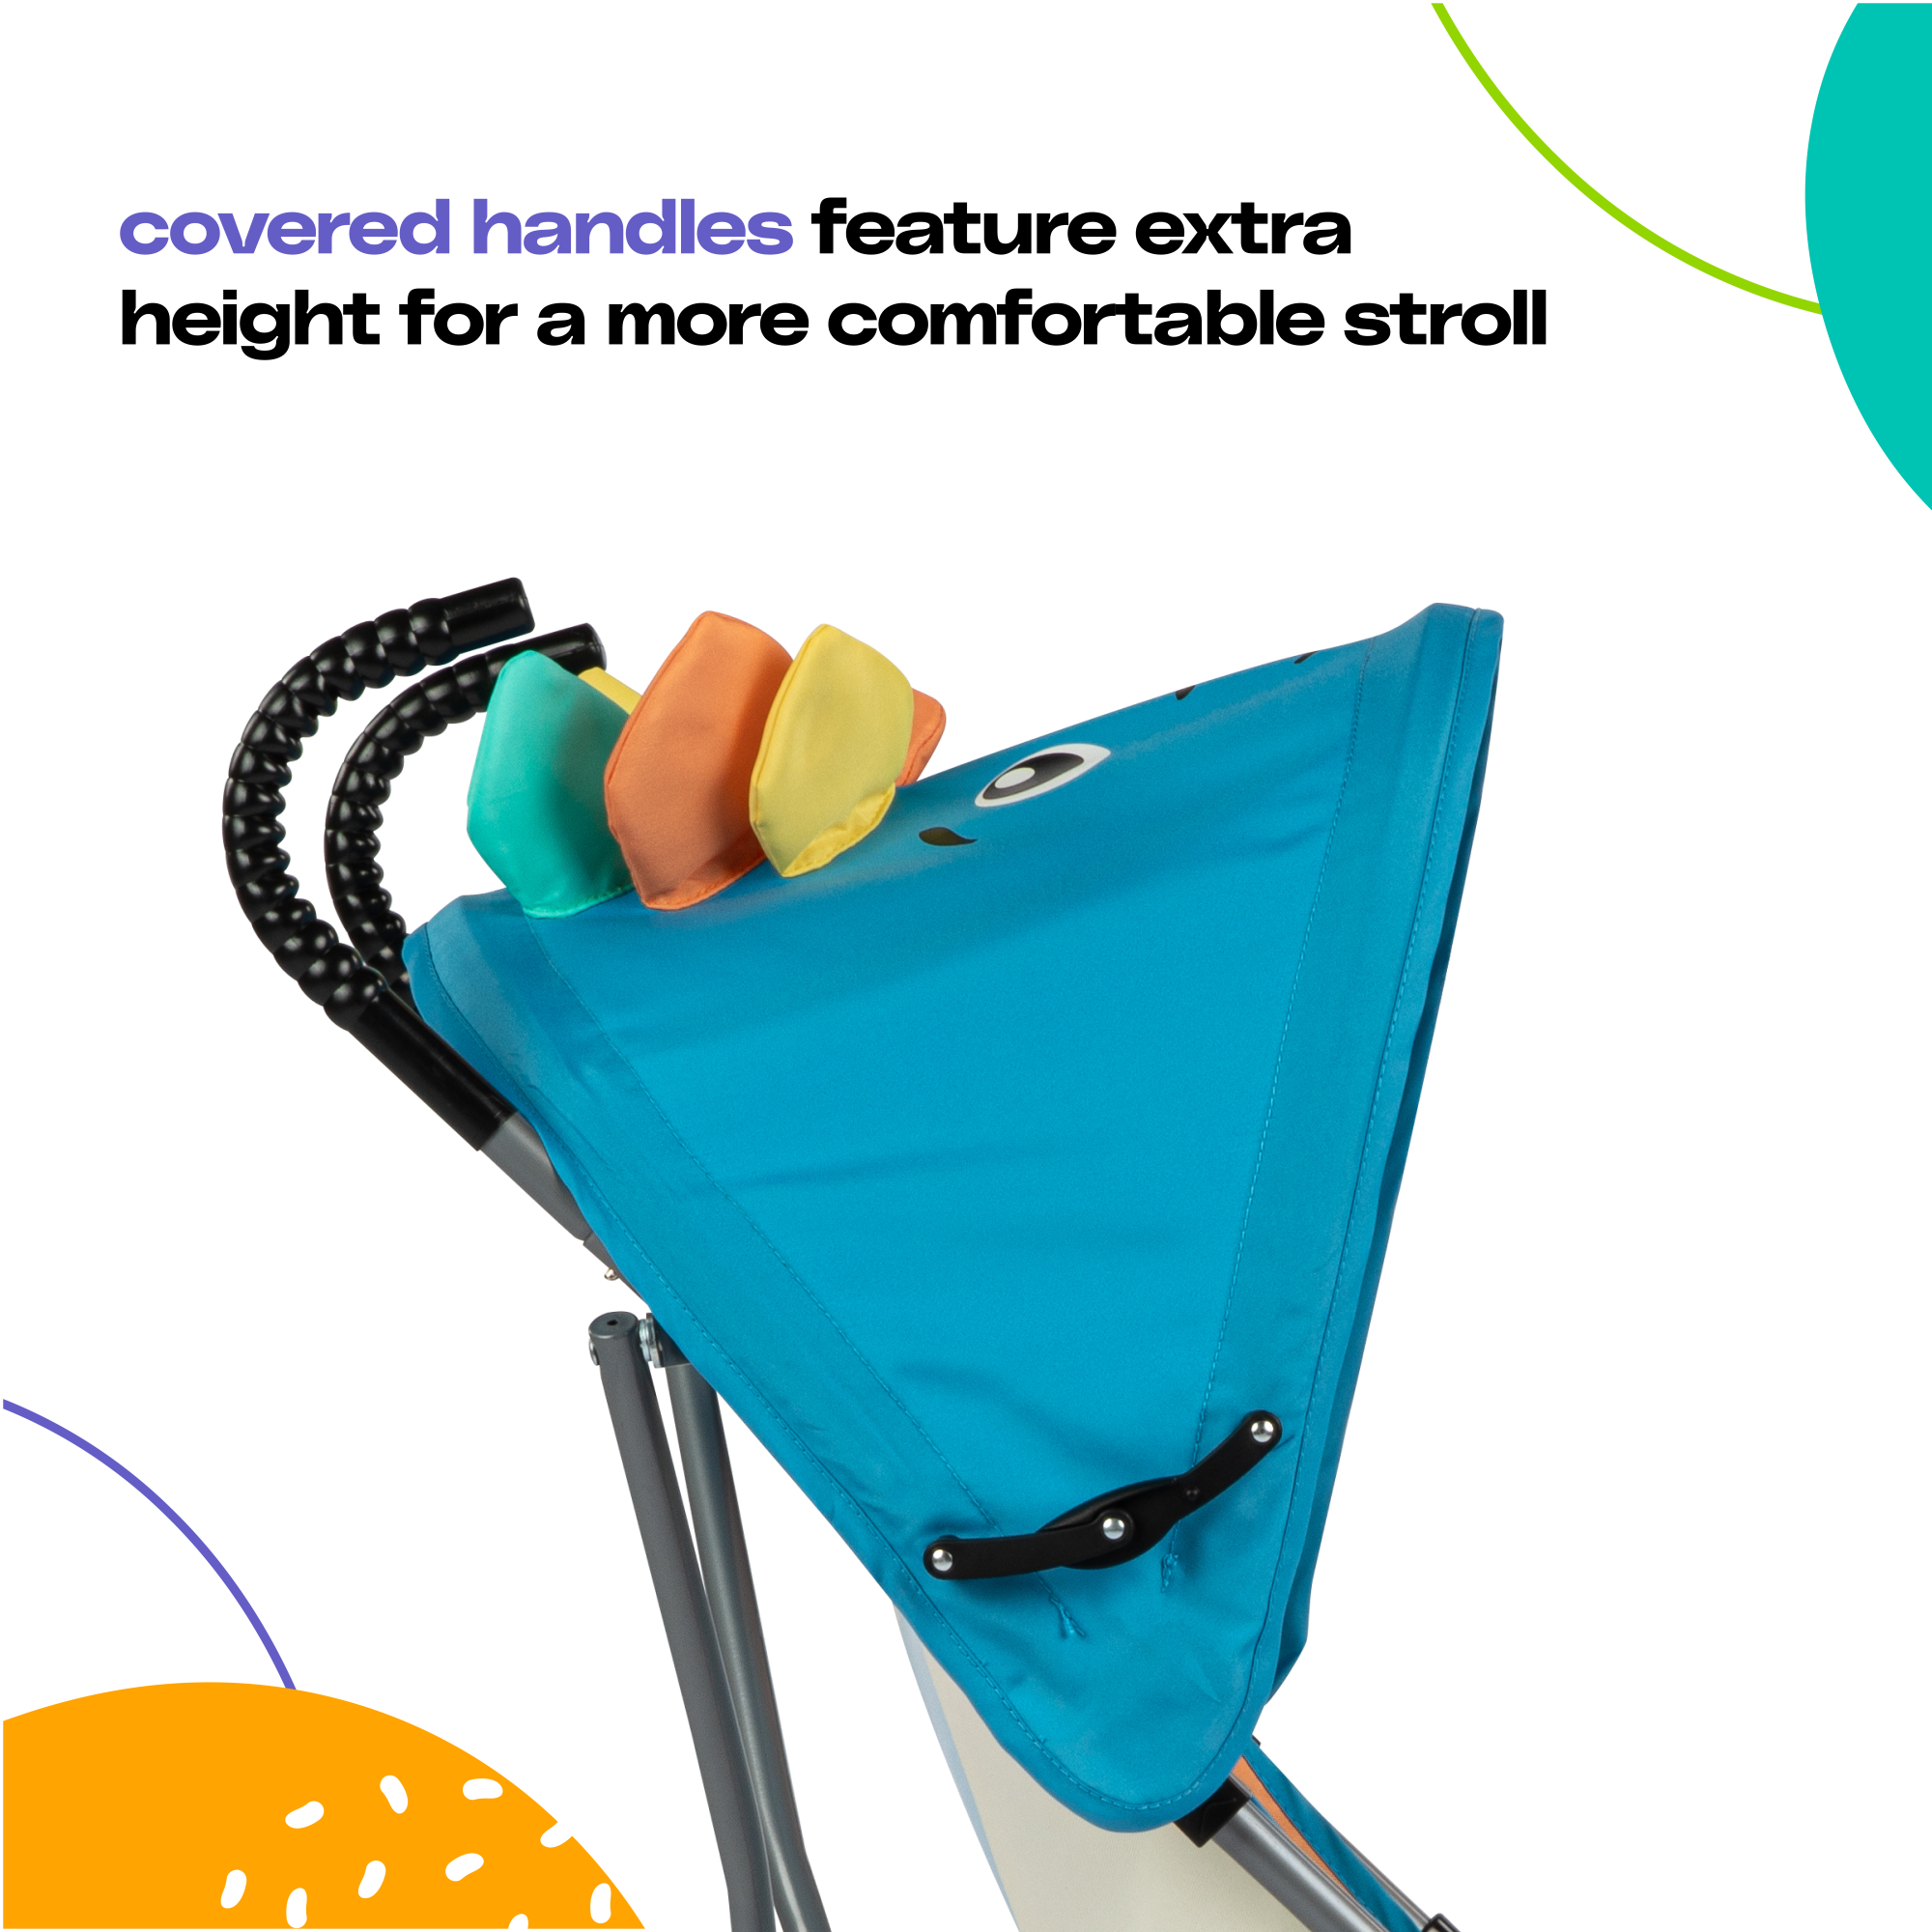 Cosco Kids™ Character Umbrella Stroller - Stewie Stegosaurus - covered handles feature extra height for a more comfortable stroll